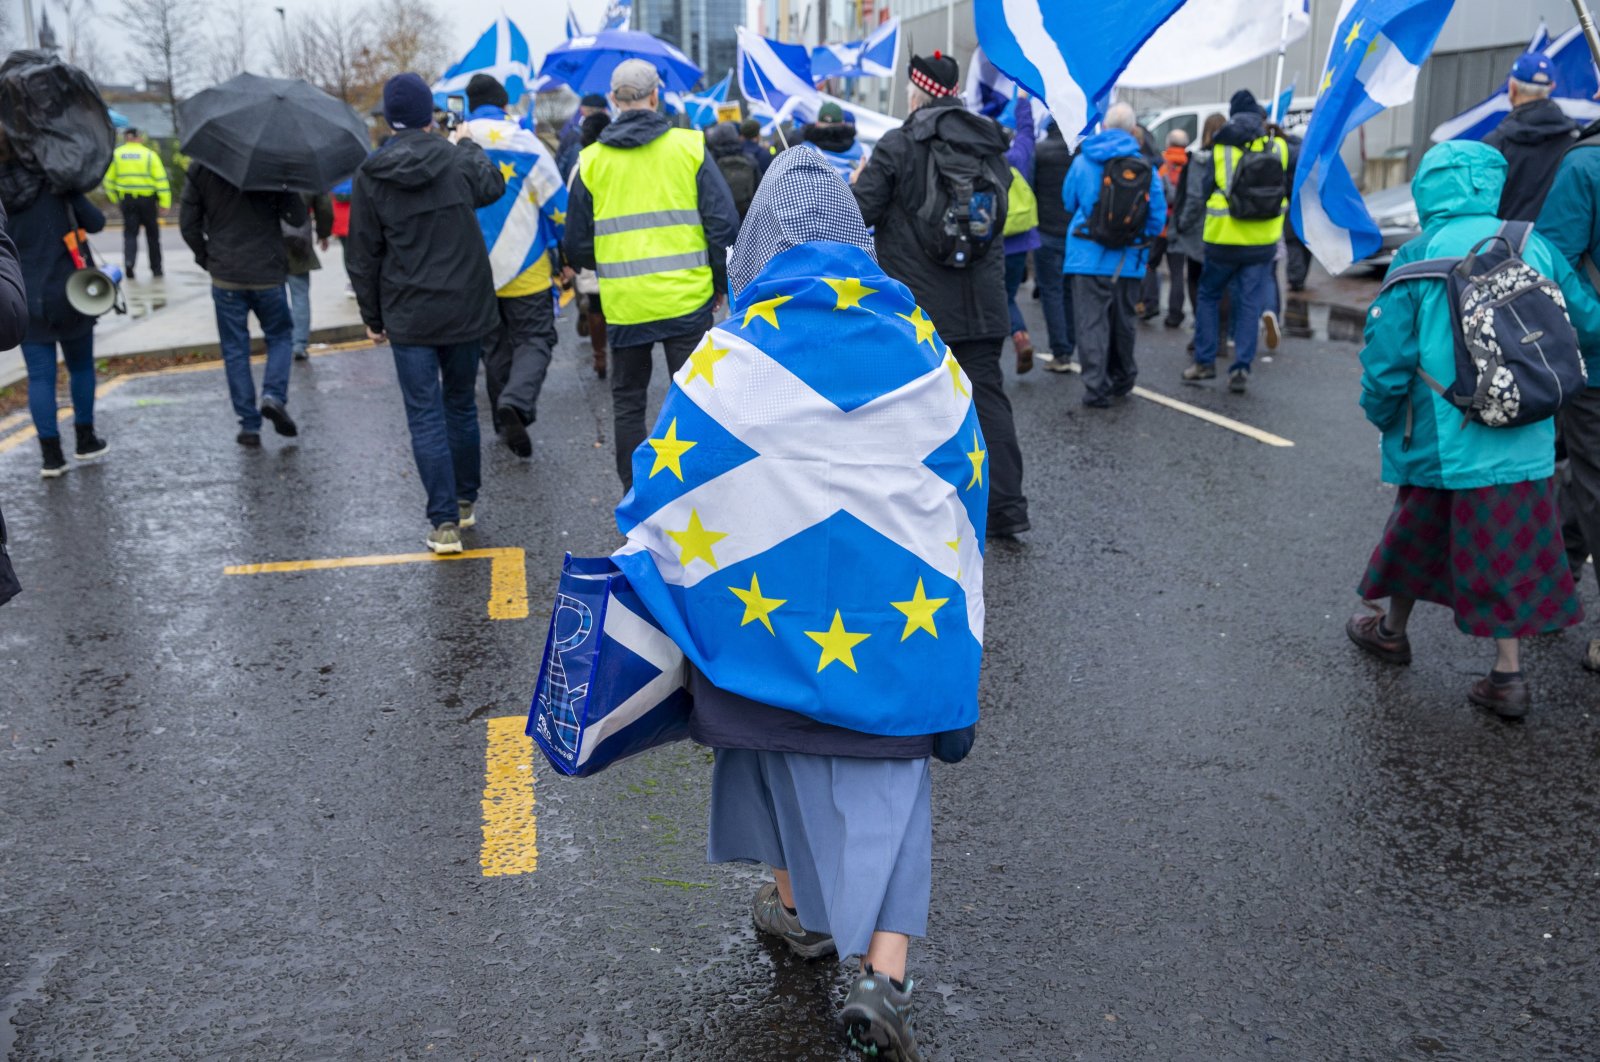 Members of the All Under One Banner (AUOB) group march through the streets of Glasgow to the HQ of BBC Scotland, demanding Independence for Scotland, Glasgow, Britain, Nov. 26, 2022. (EPA Photo)